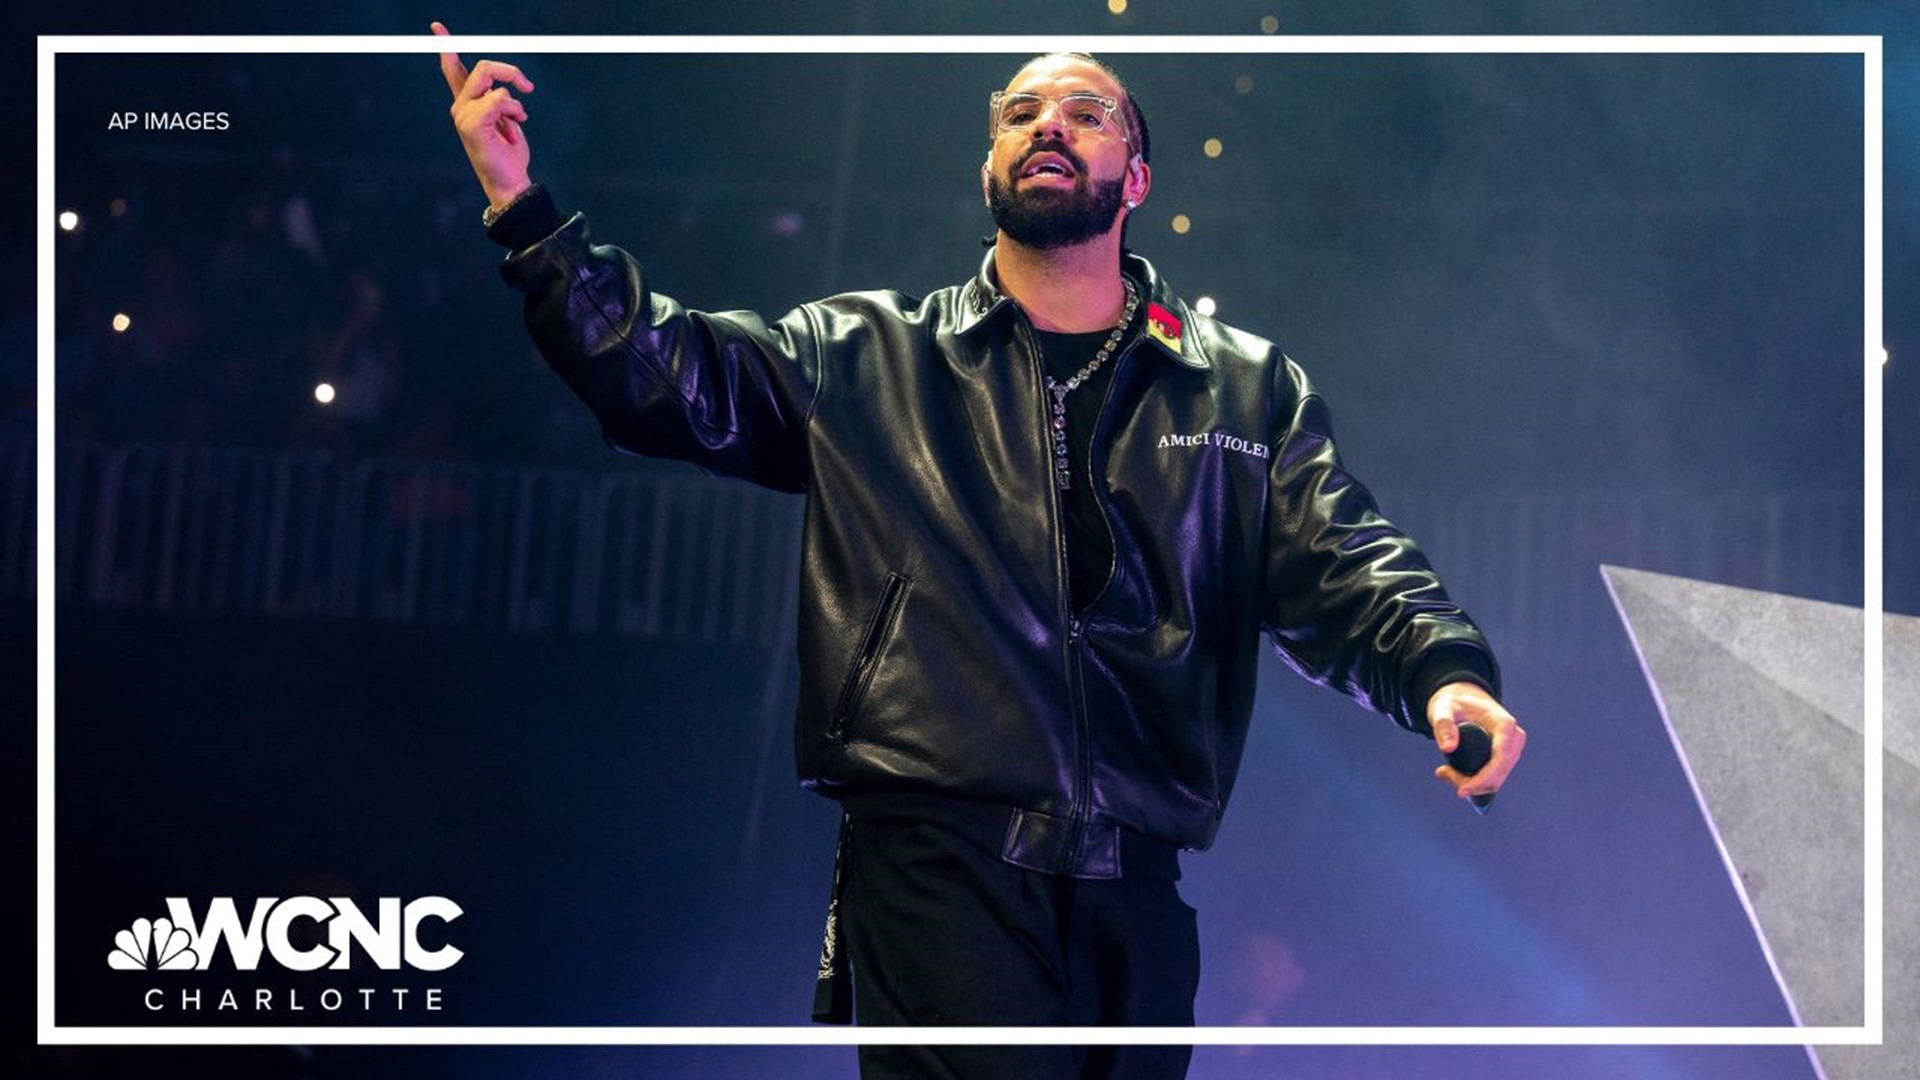 Grammy-winning rapper Drake will perform in Charlotte this weekend and fans are "in their feelings" about the shows.